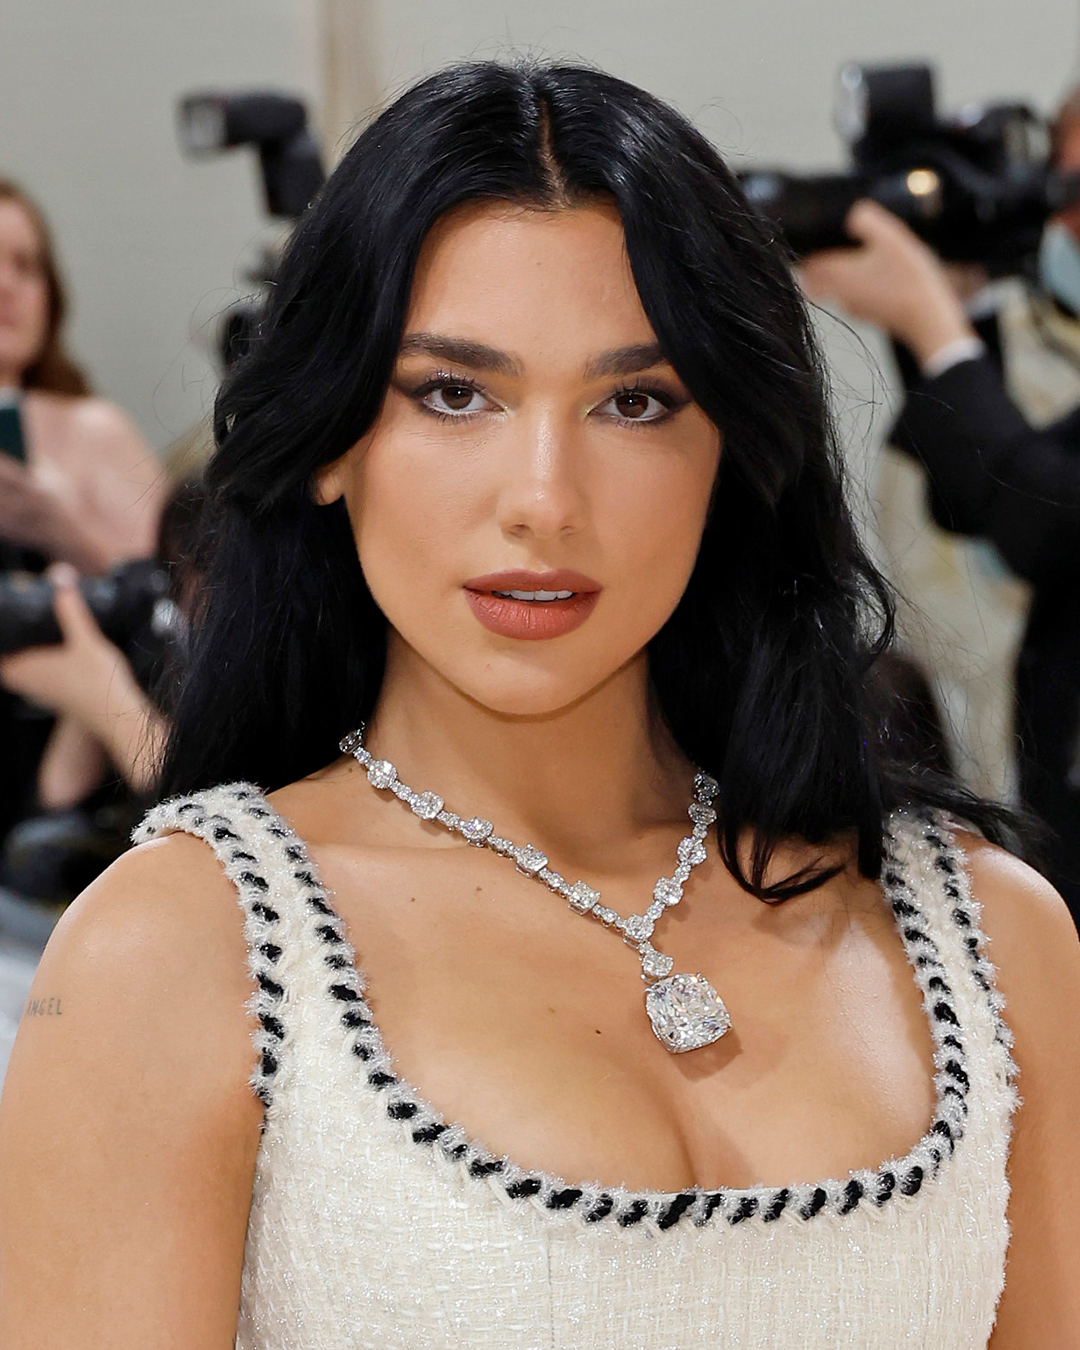 Dua Lipa attended the 2023 Met Gala wearing a massive natural diamond neckalce from TIffany & Co.